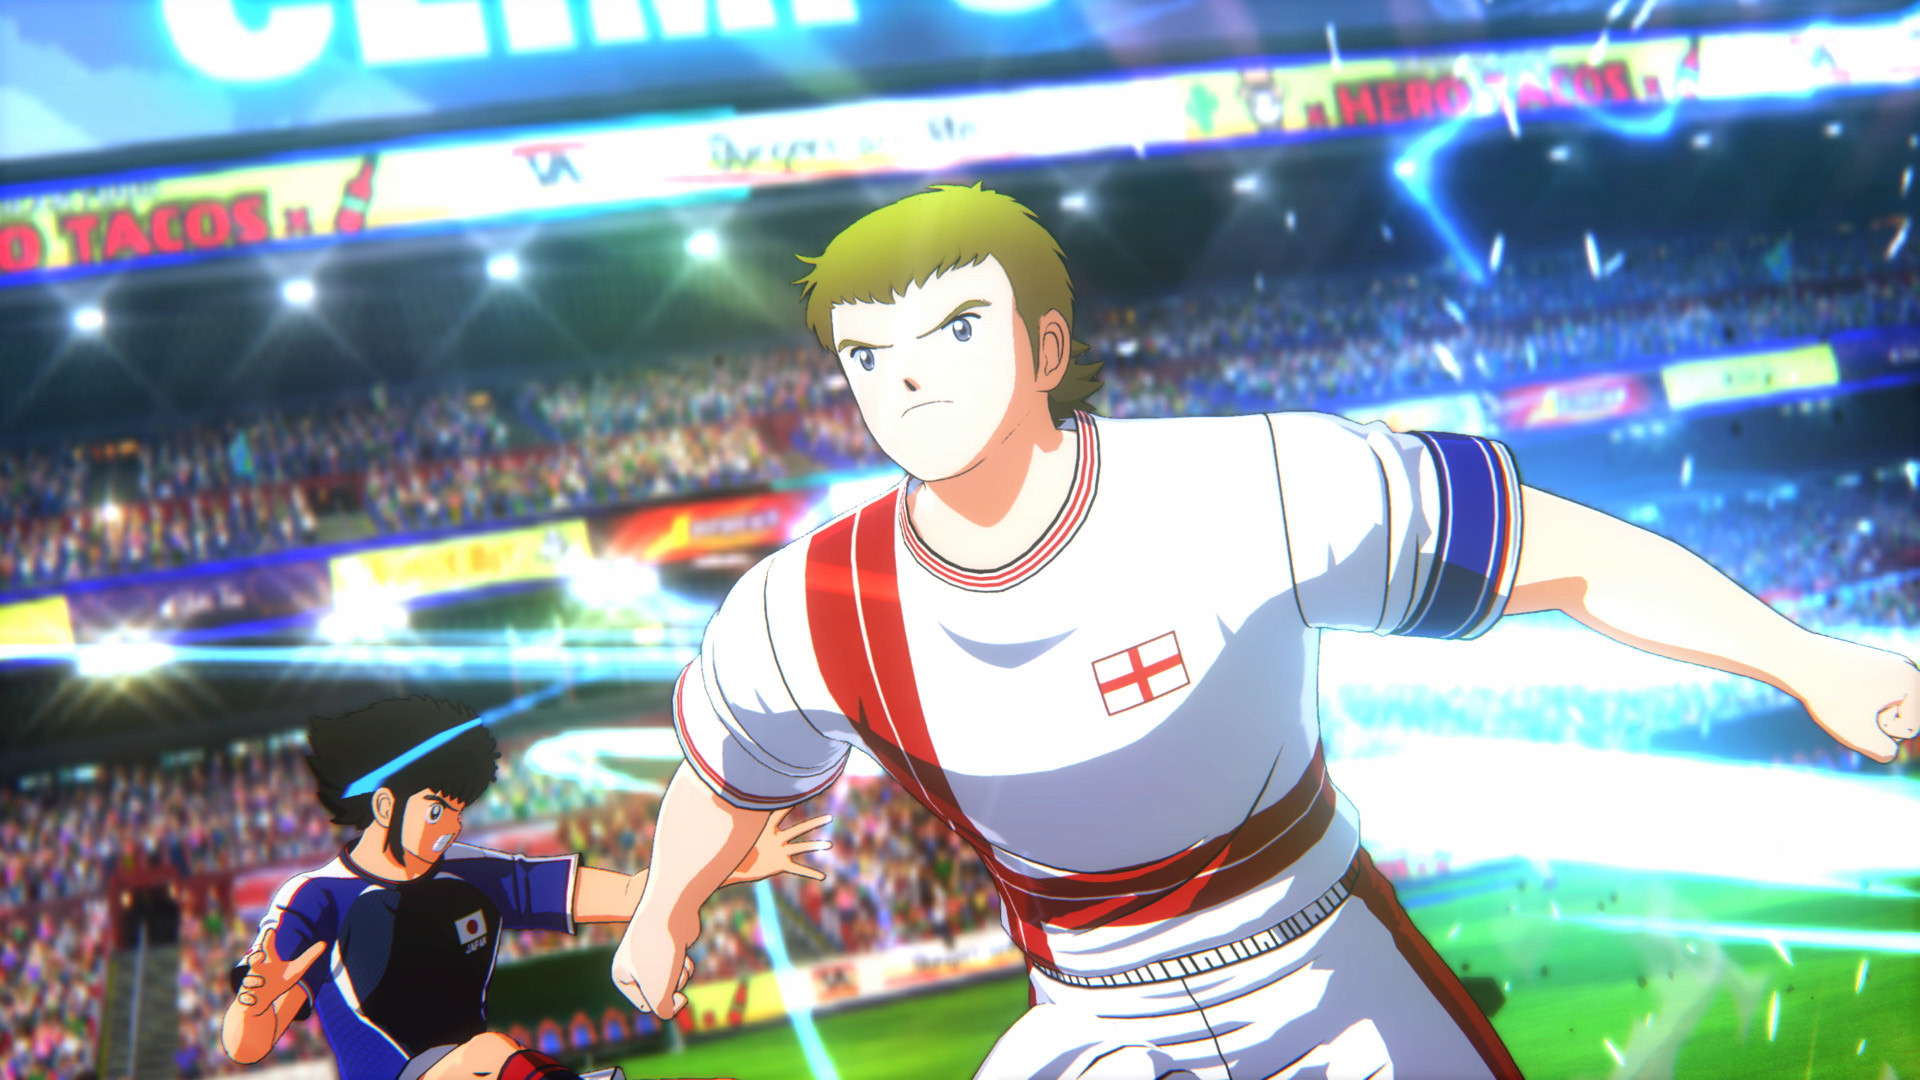 Save 75% on Captain Tsubasa: Rise of New Champions on Steam